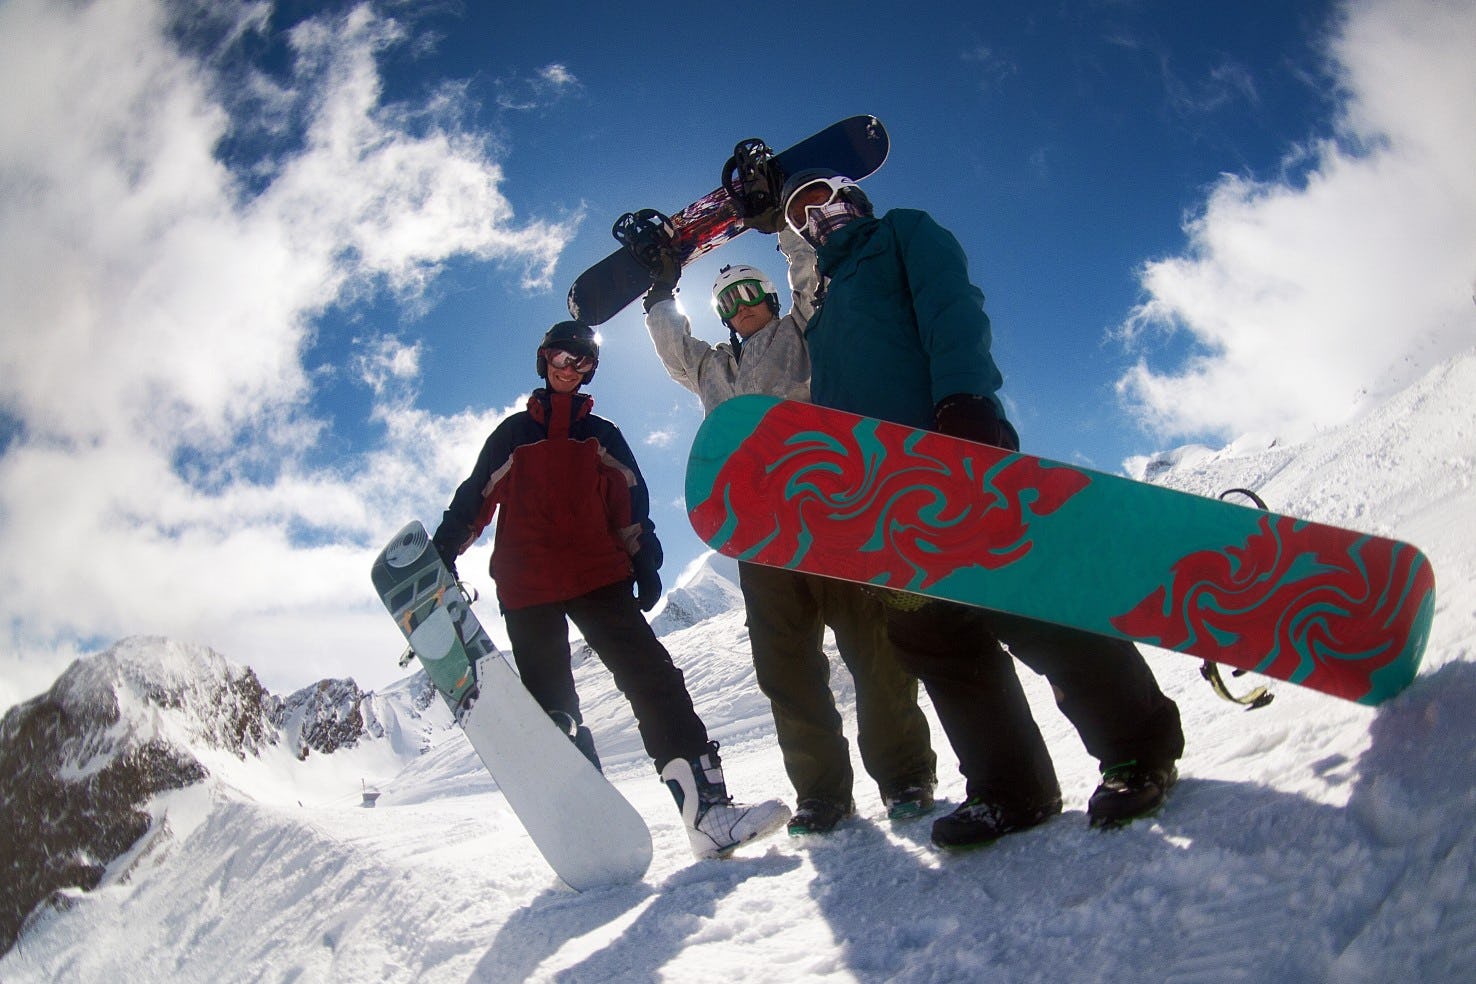 Group of 3 snowboarders posing in front of some fresh snow